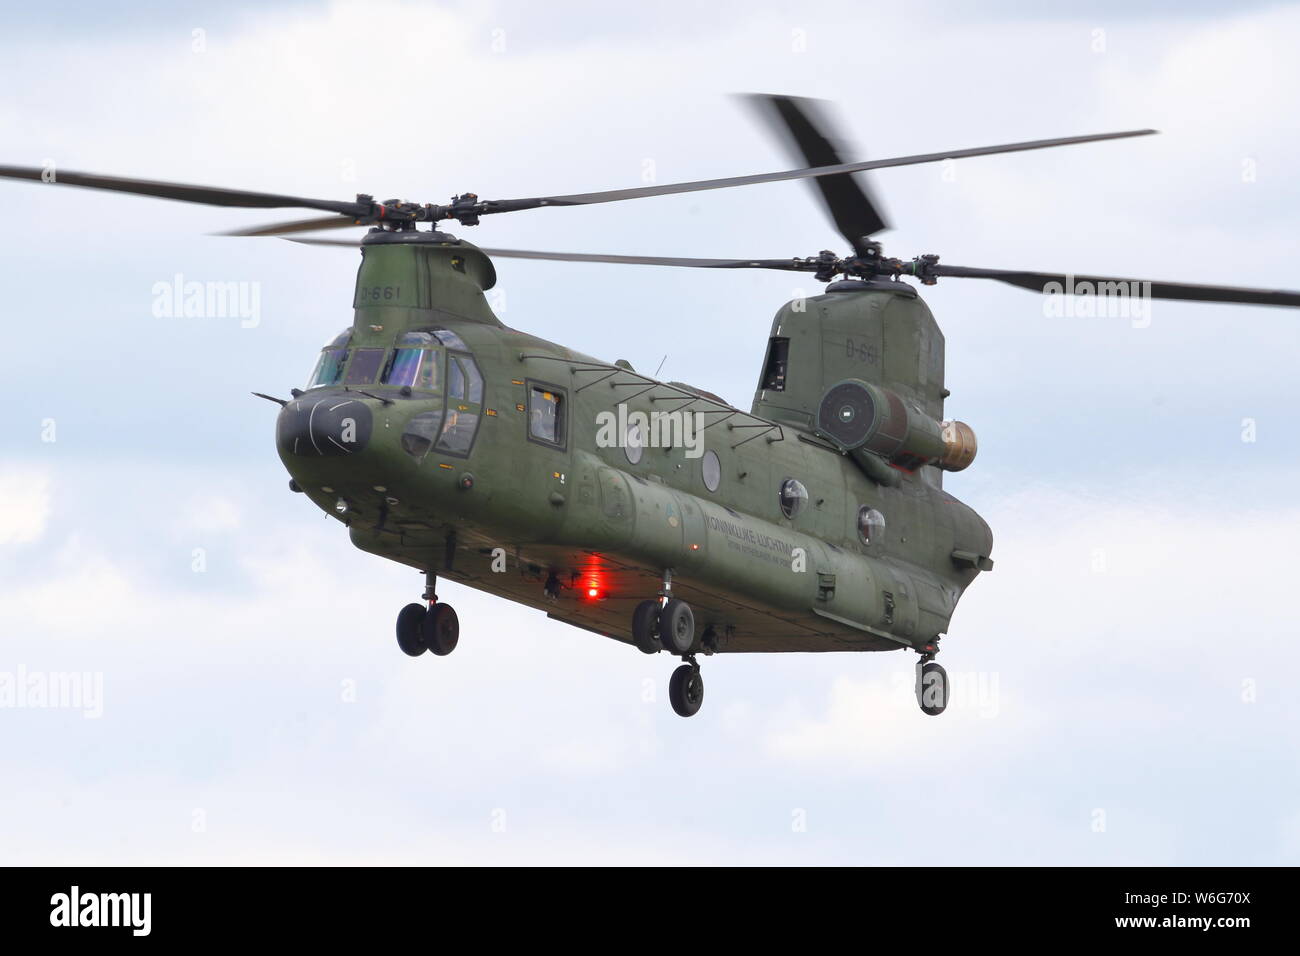 Royal Netherlands Air Force CH-47D/F Chinook arriving at the 2019 Royal International Air Tattoo at RAF Fairford, UK Stock Photo